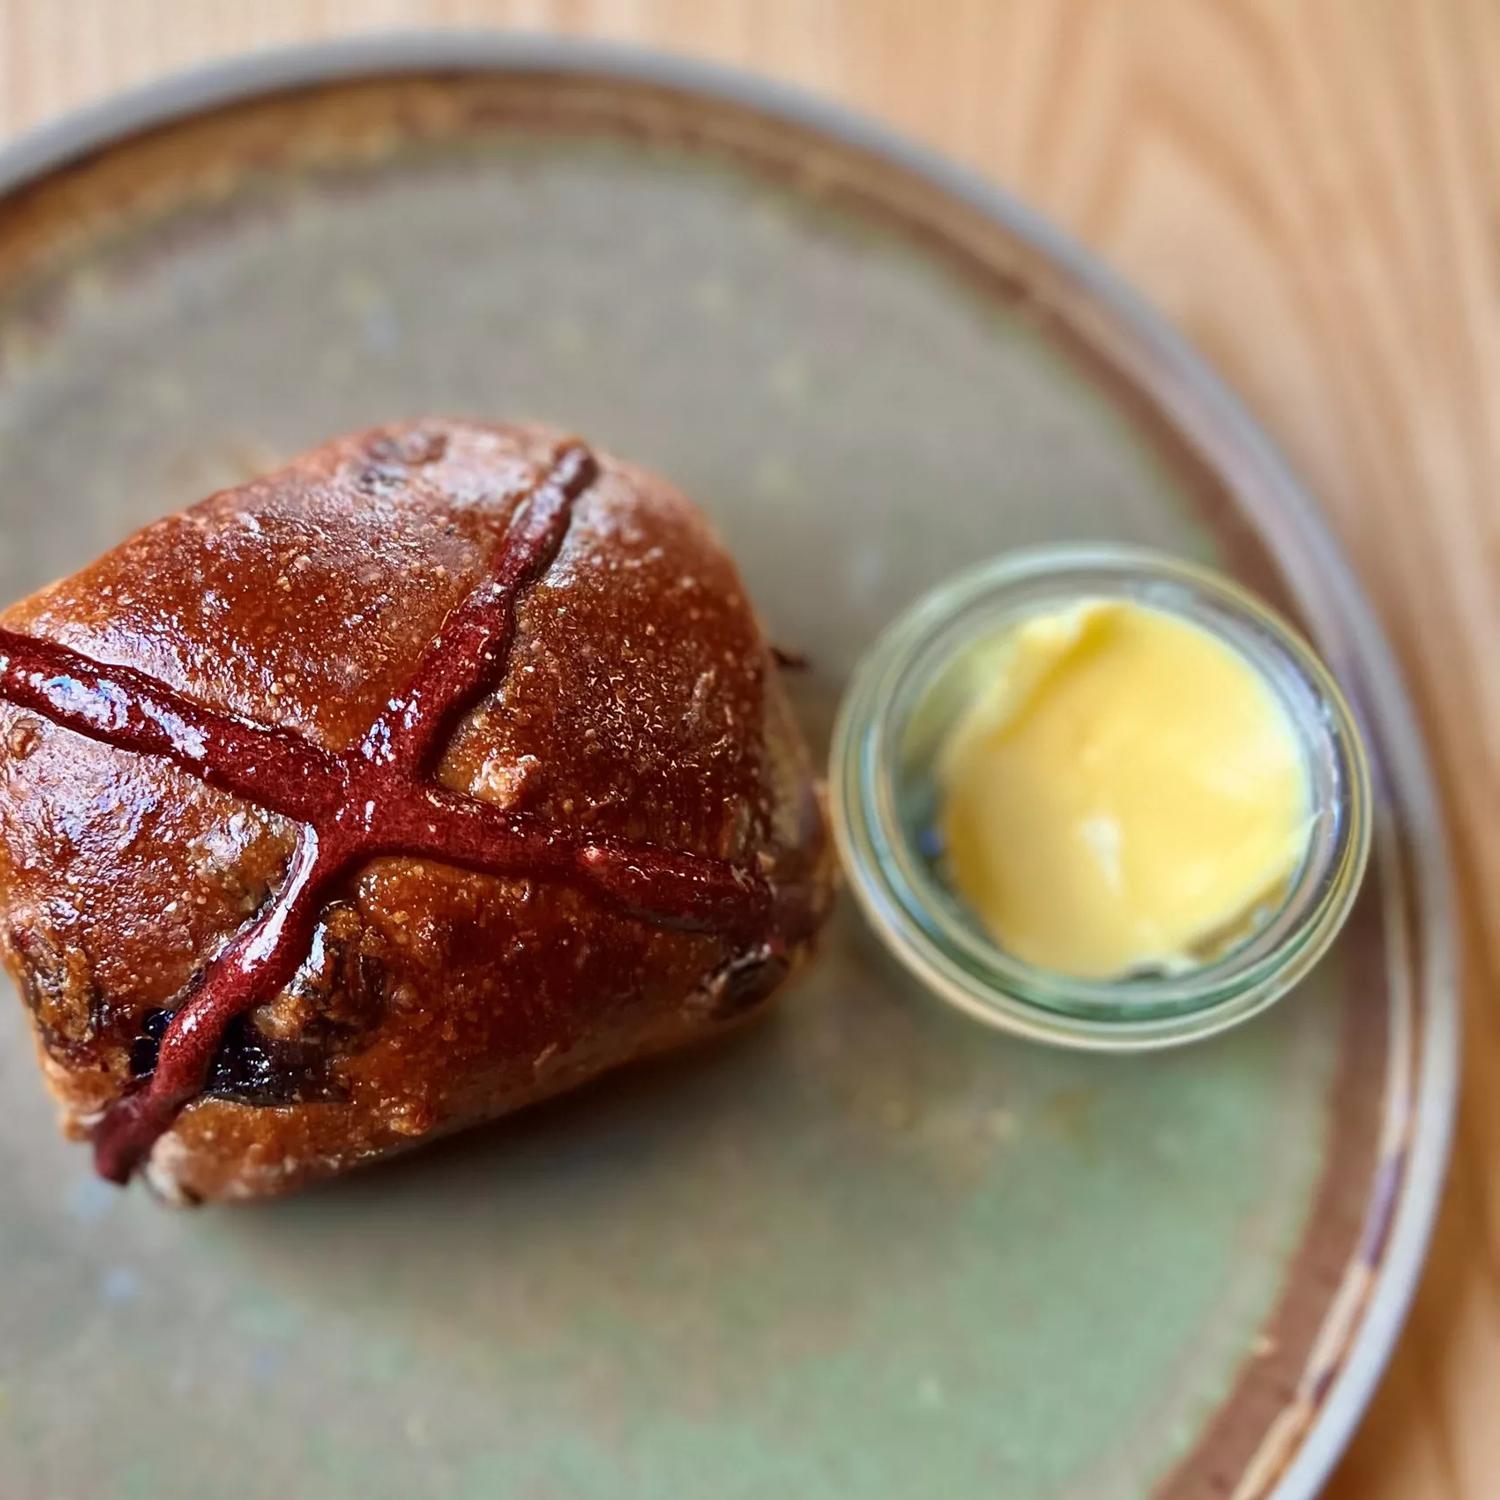 A single hot cross bun from August café. It is pictured looking directly down from above. It sits on a handmade pottery plate with a small bowl of butter to the right hand side.